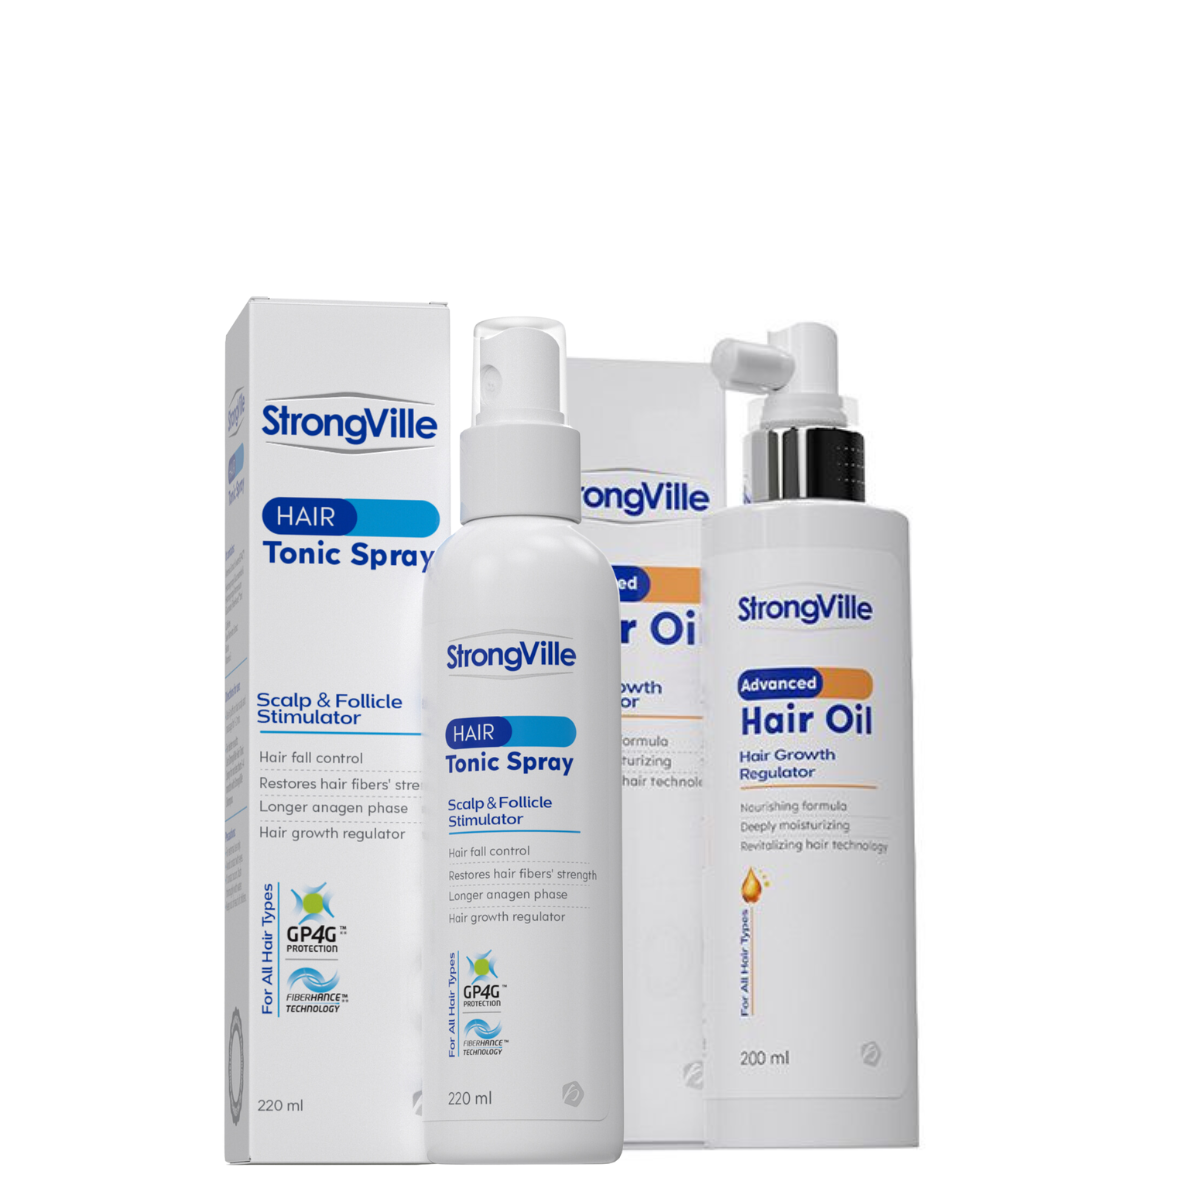 Strongville Oil and Hair Spray Offer